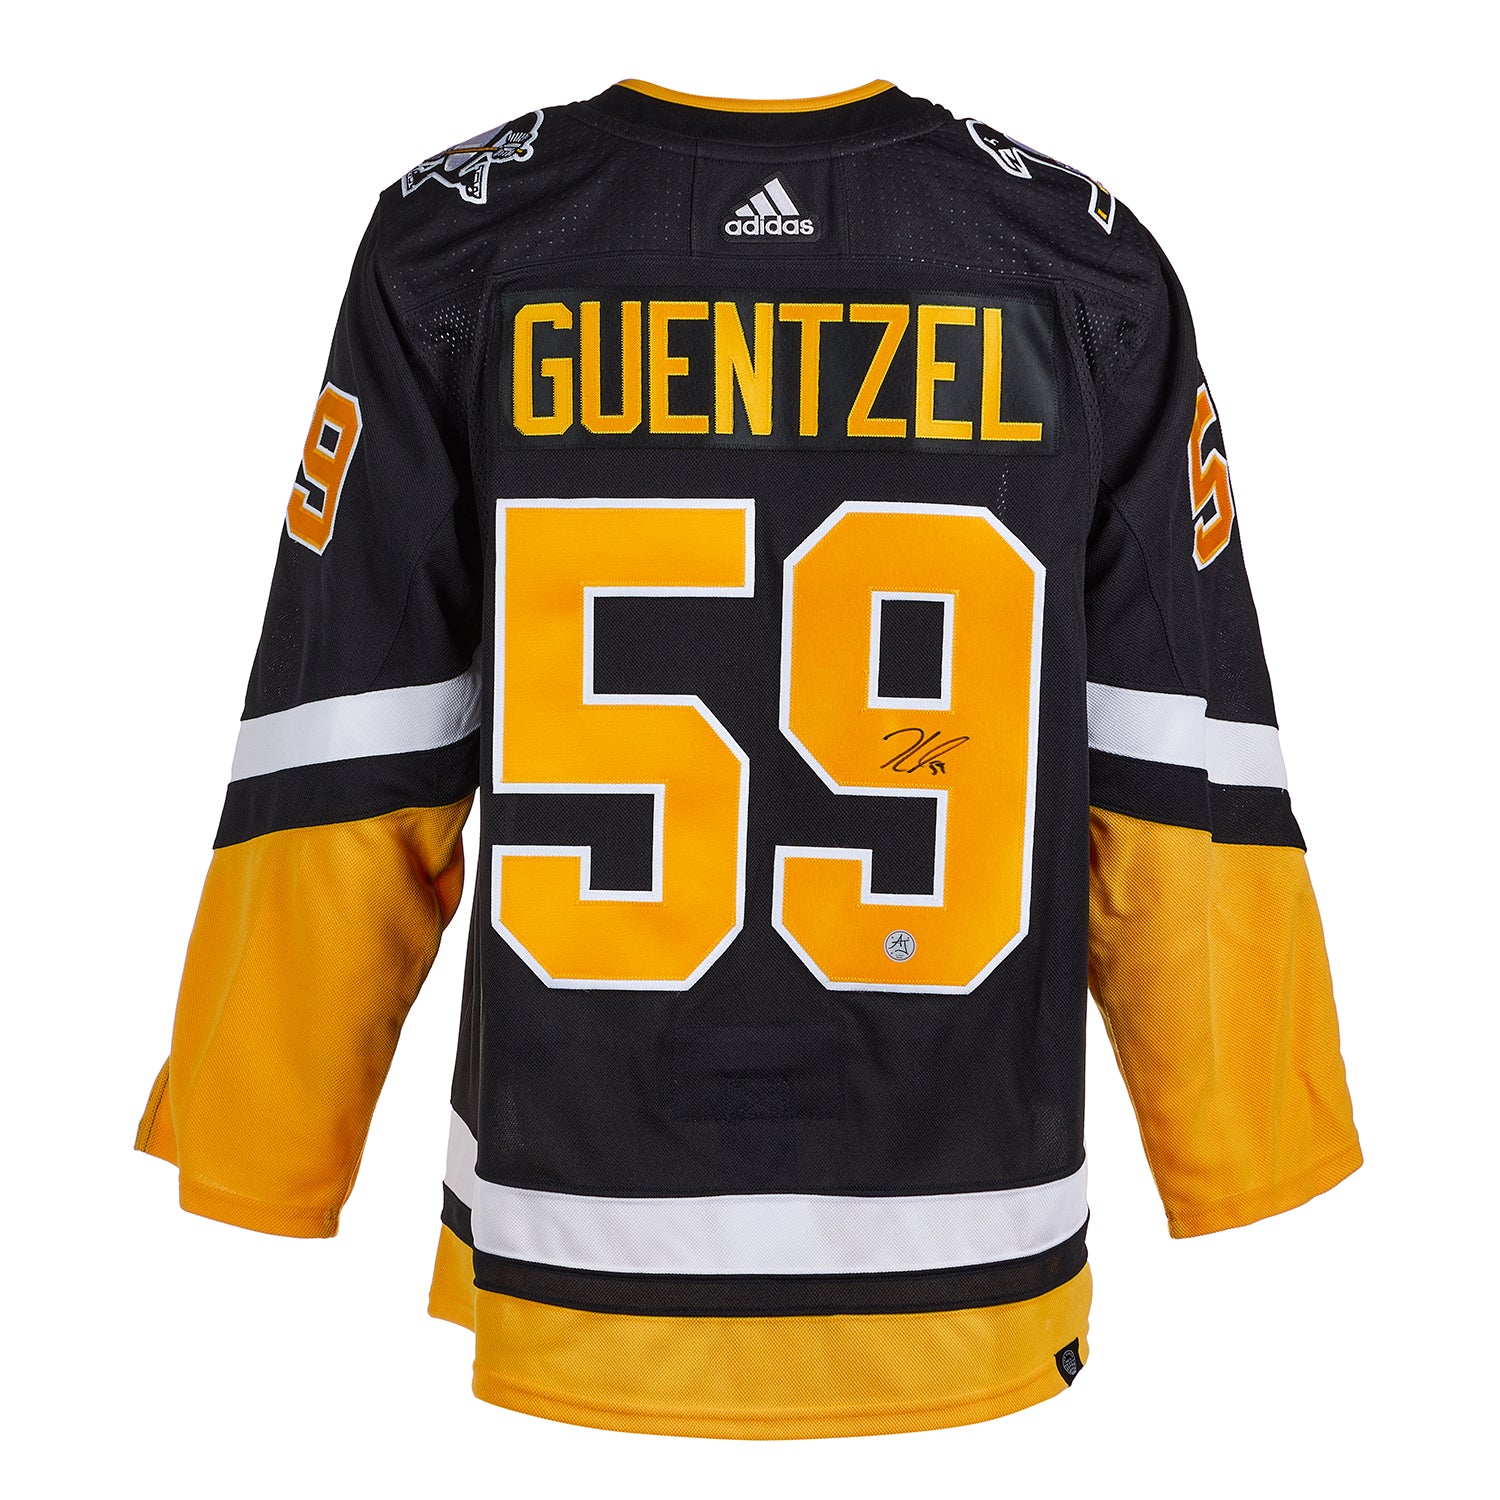 Jake Guentzel Signed 2022 NHL All-Star White Adidas Jersey